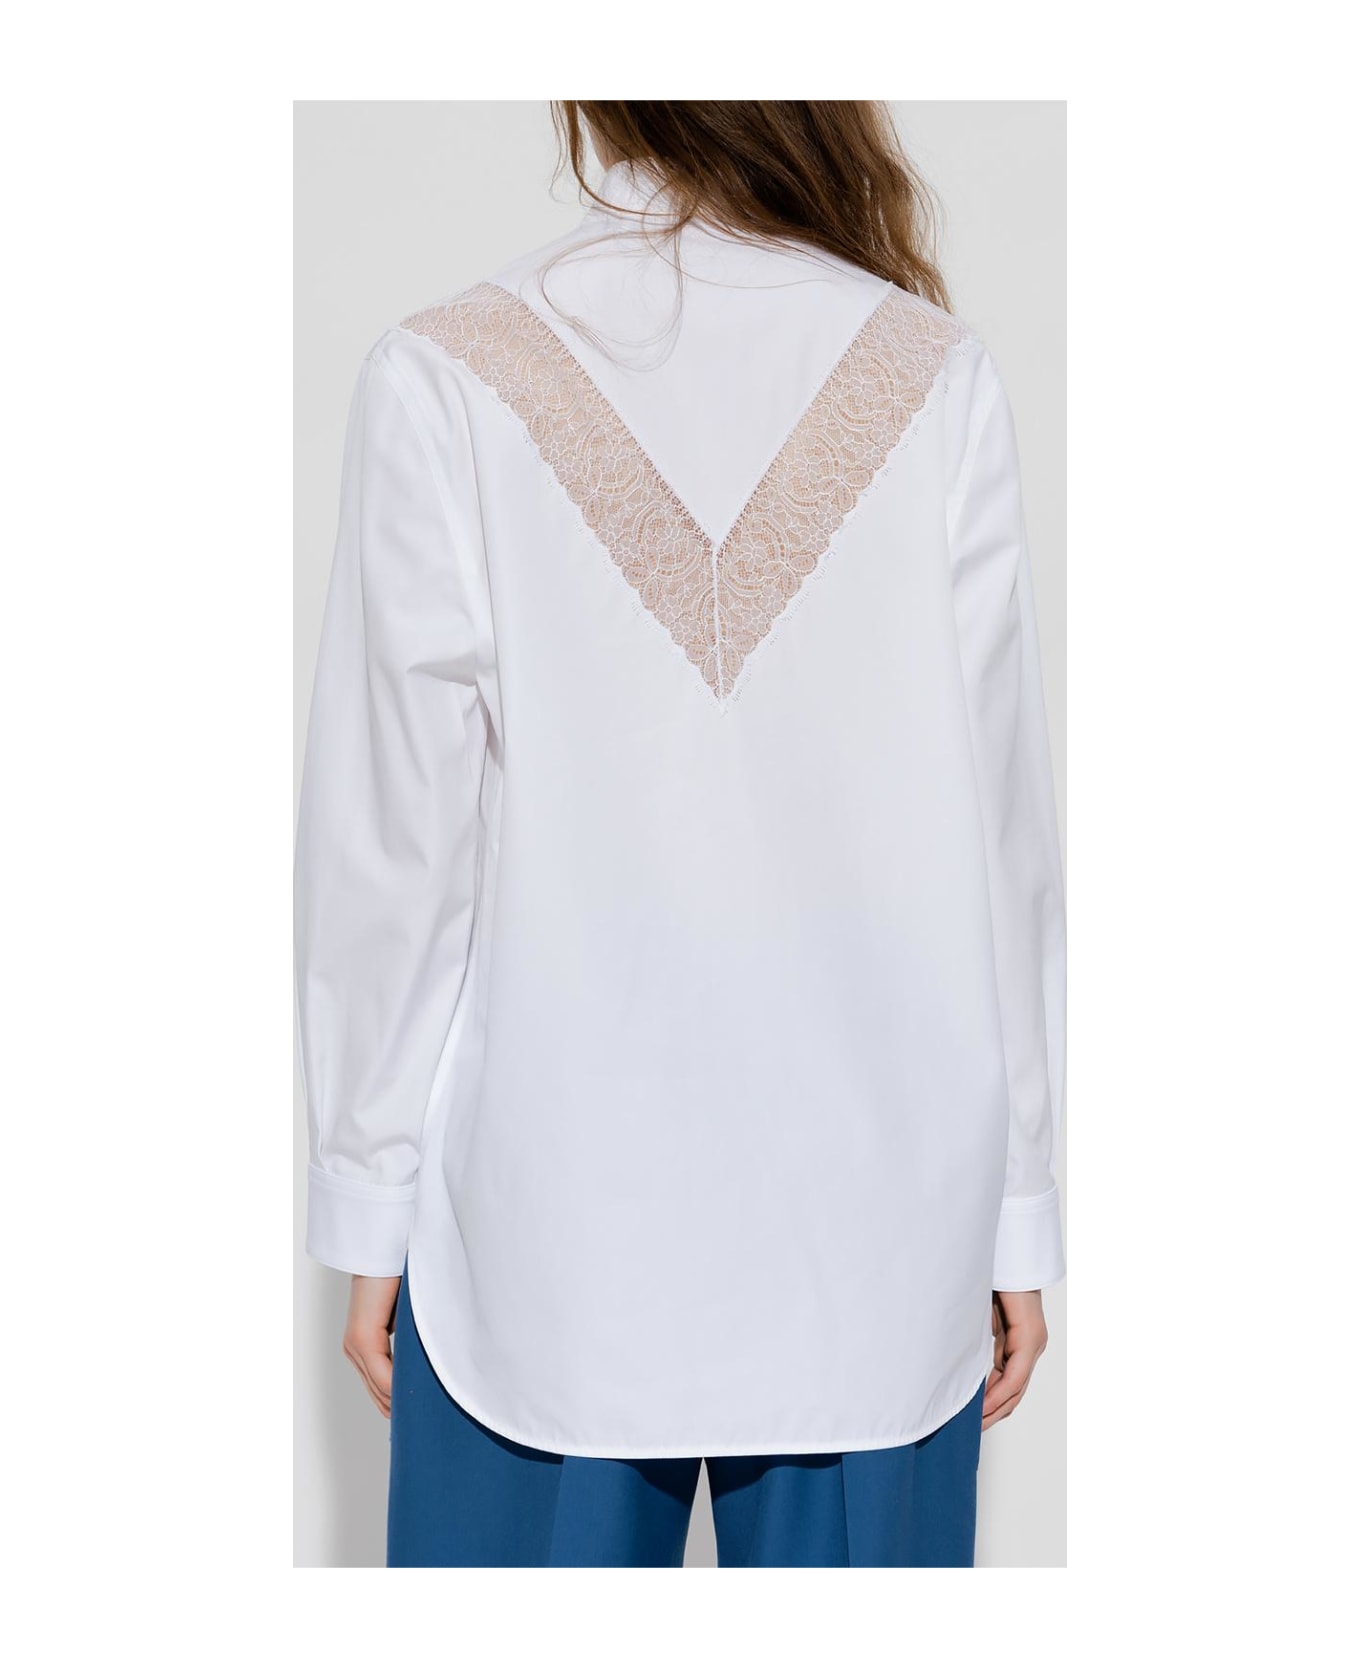 Burberry Shirt With Lace Inserts - White